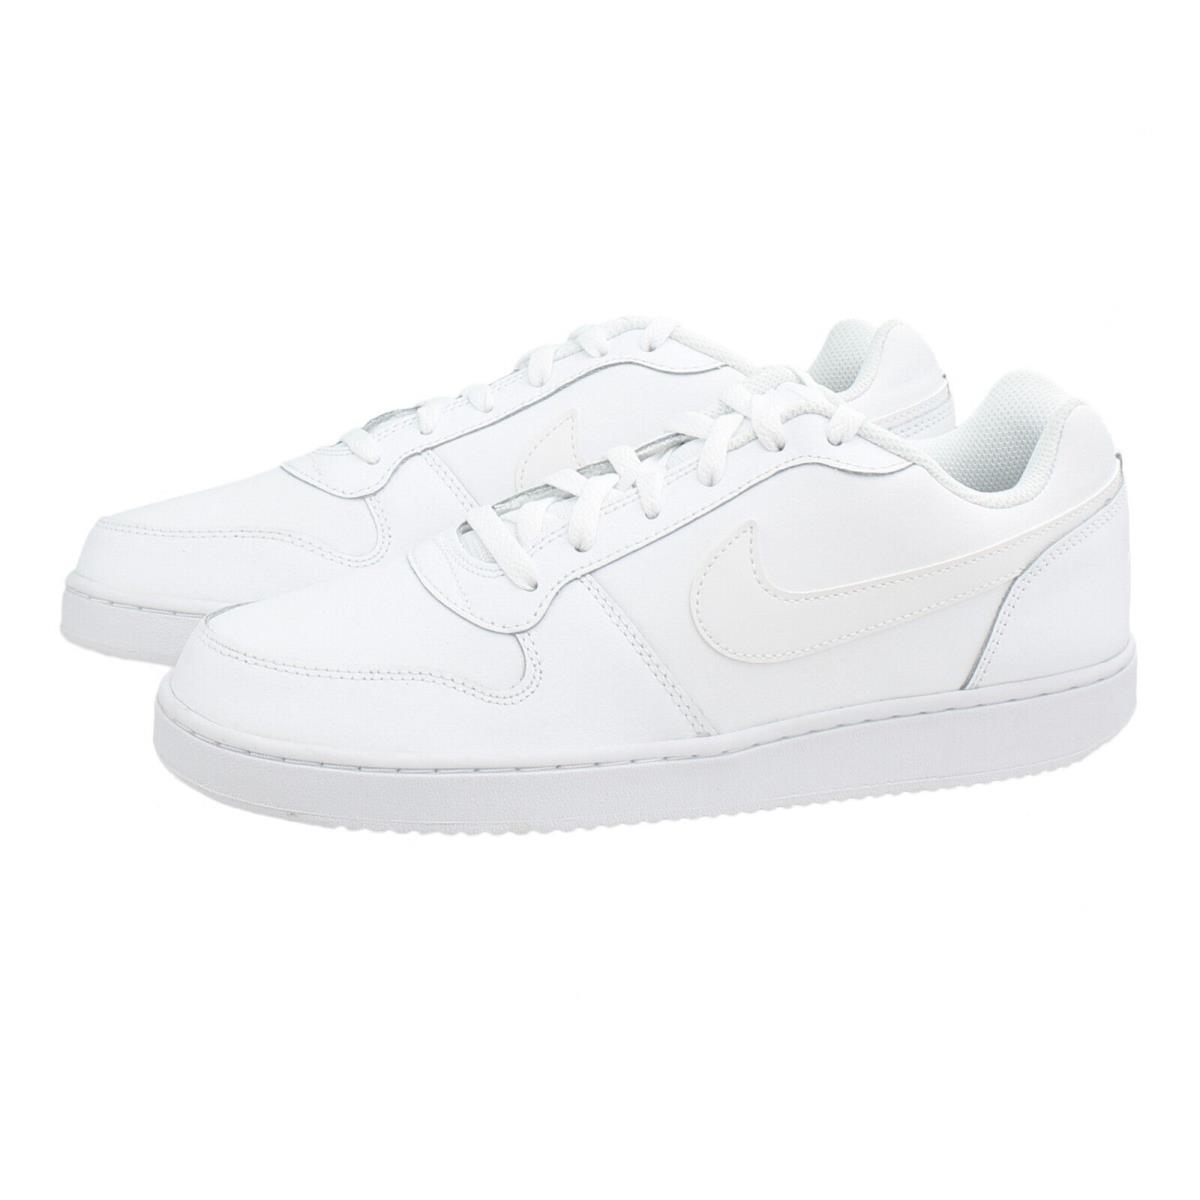 Nike Men`s Ebernon Low Sneakers AQ1775 Stitched Leather Retro-style Court Shoes White - 100